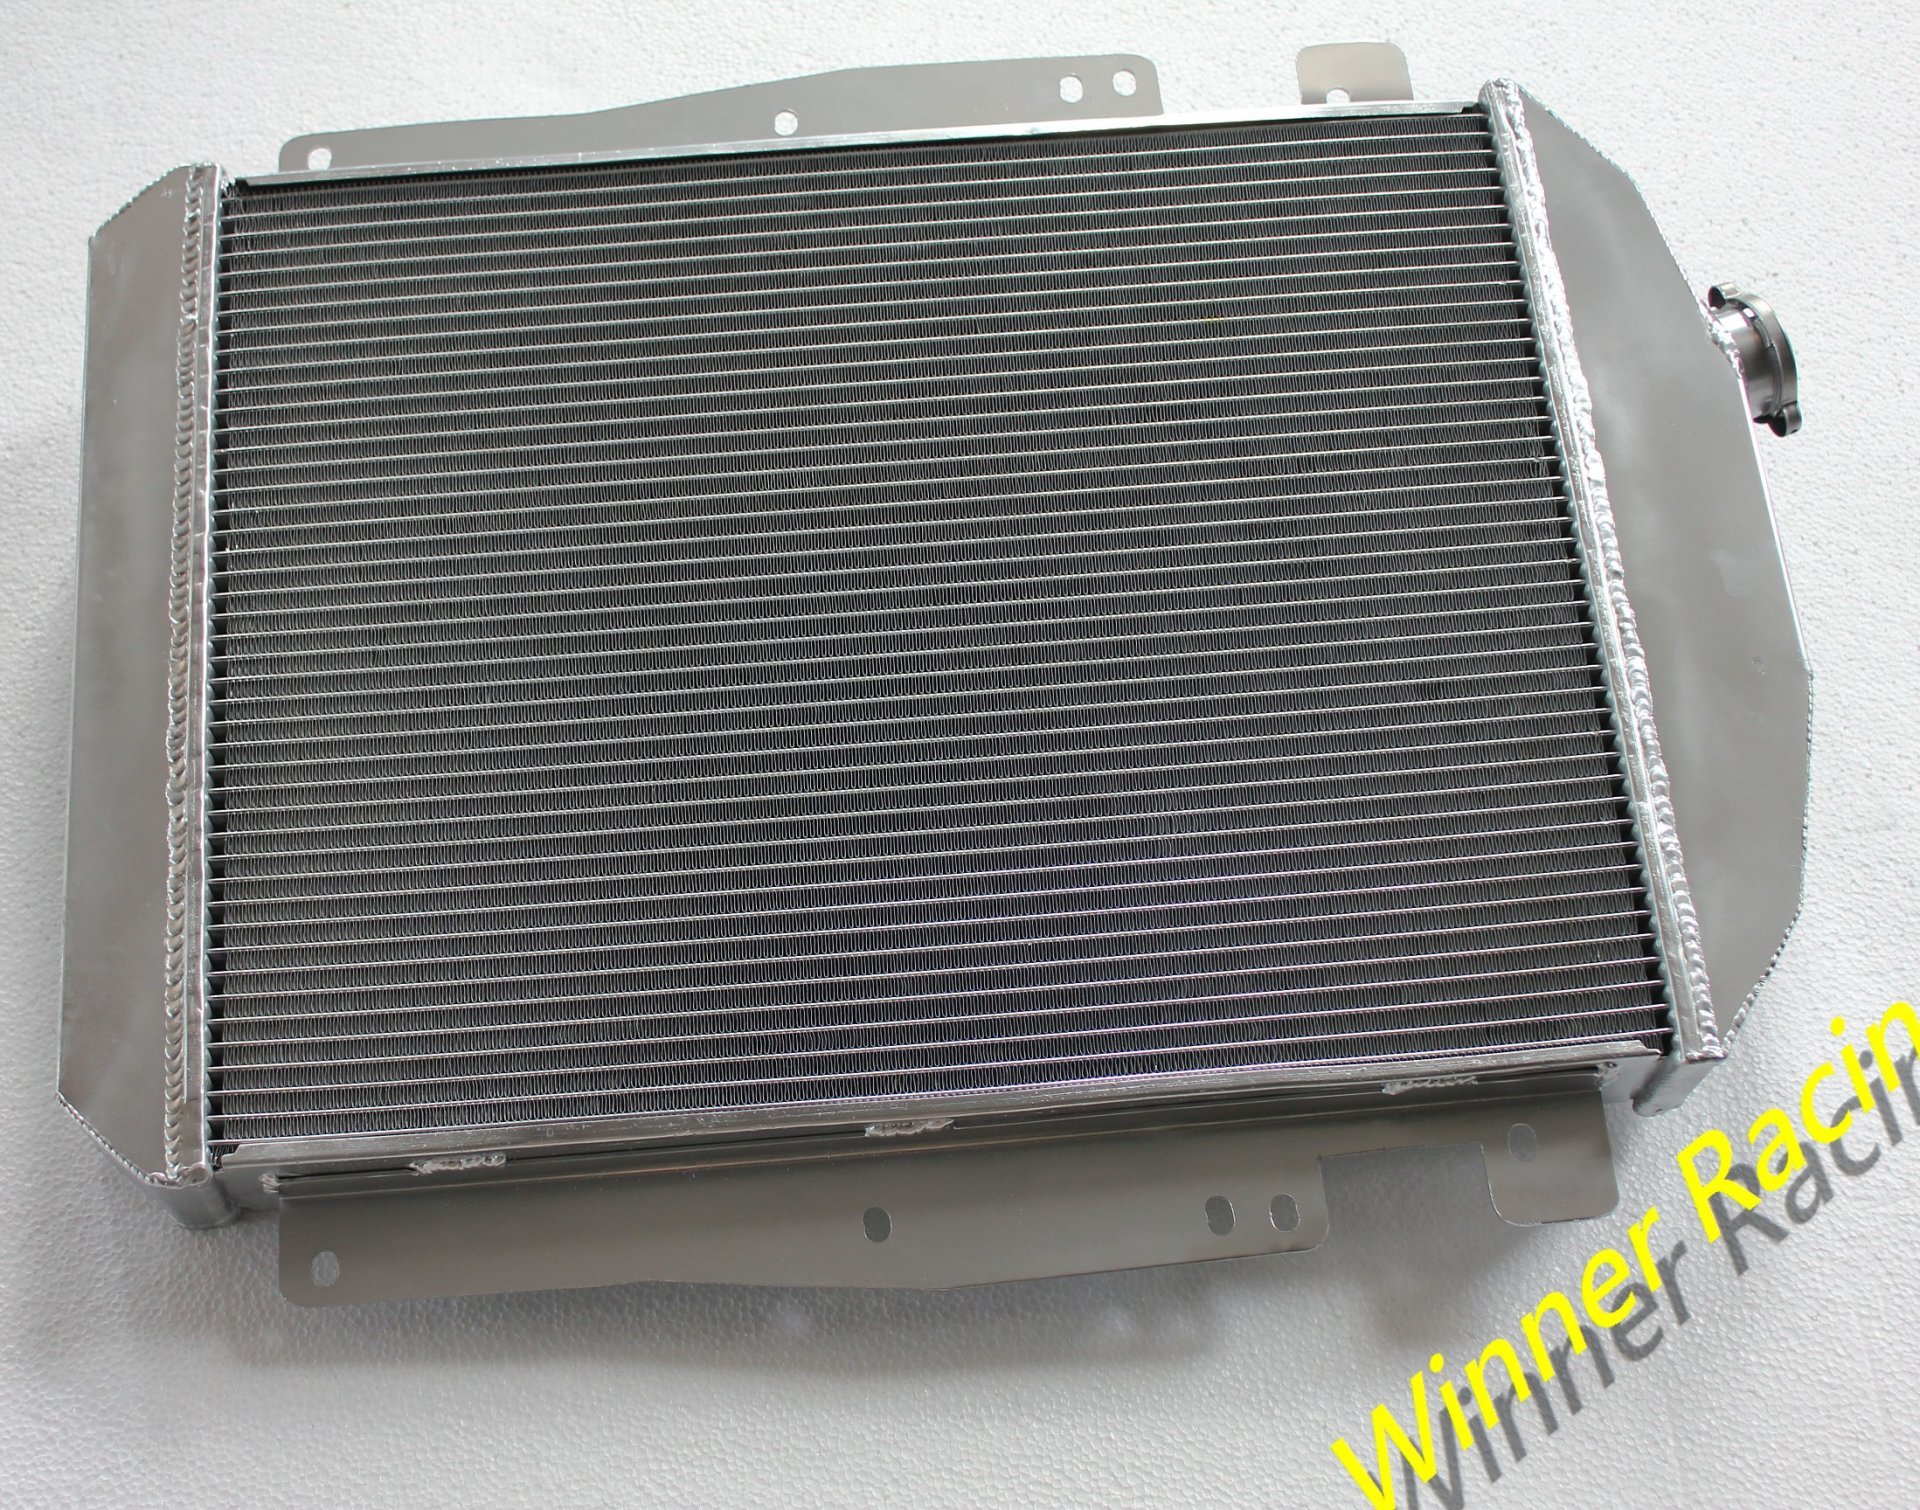 ALUMINUM RADIATOR for CHEVY PICK UP/TRUCK with V8 engine HI-FLOW MT 1937-1938